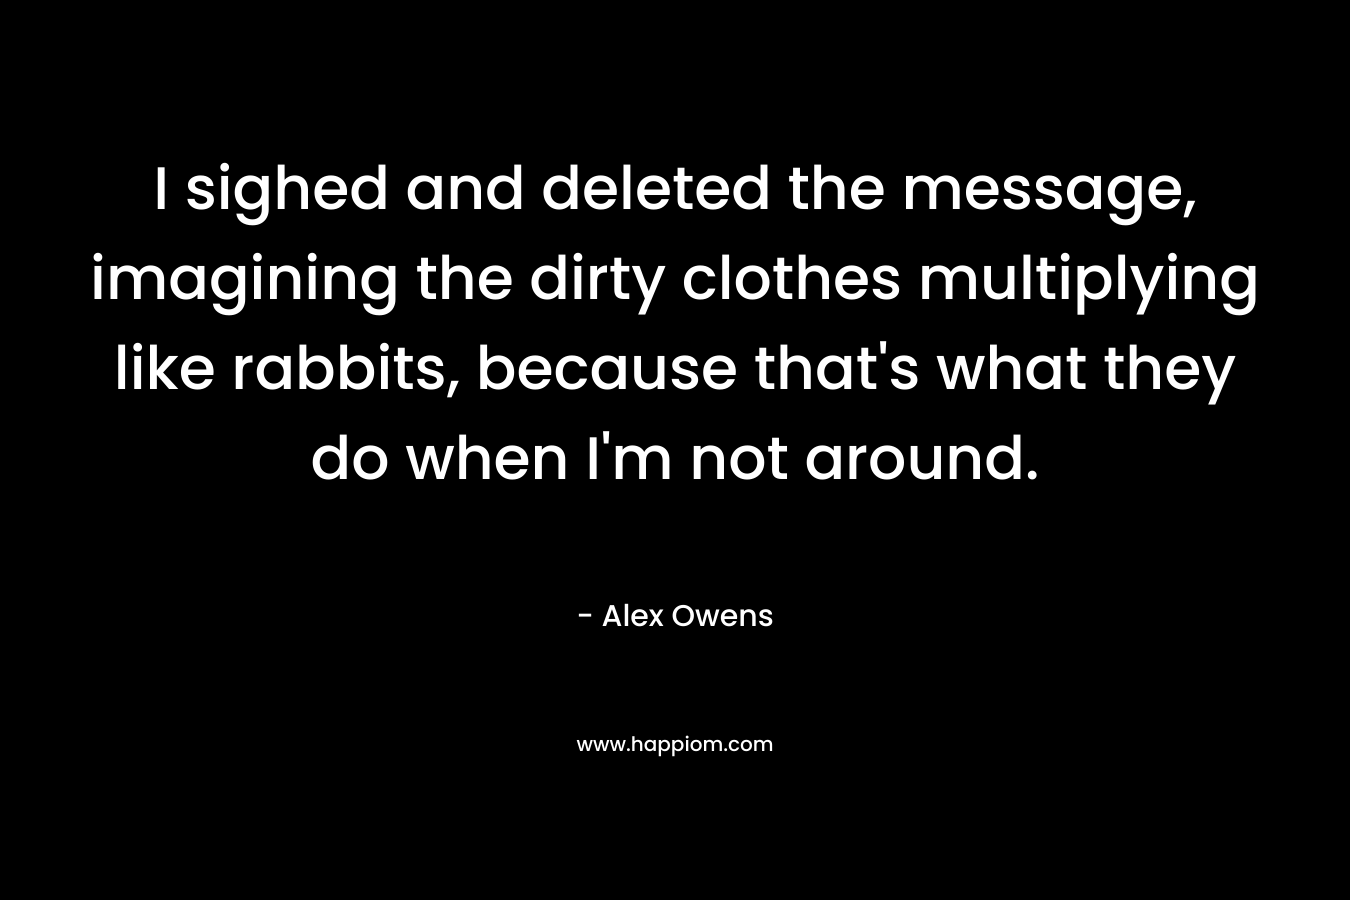 I sighed and deleted the message, imagining the dirty clothes multiplying like rabbits, because that’s what they do when I’m not around. – Alex Owens